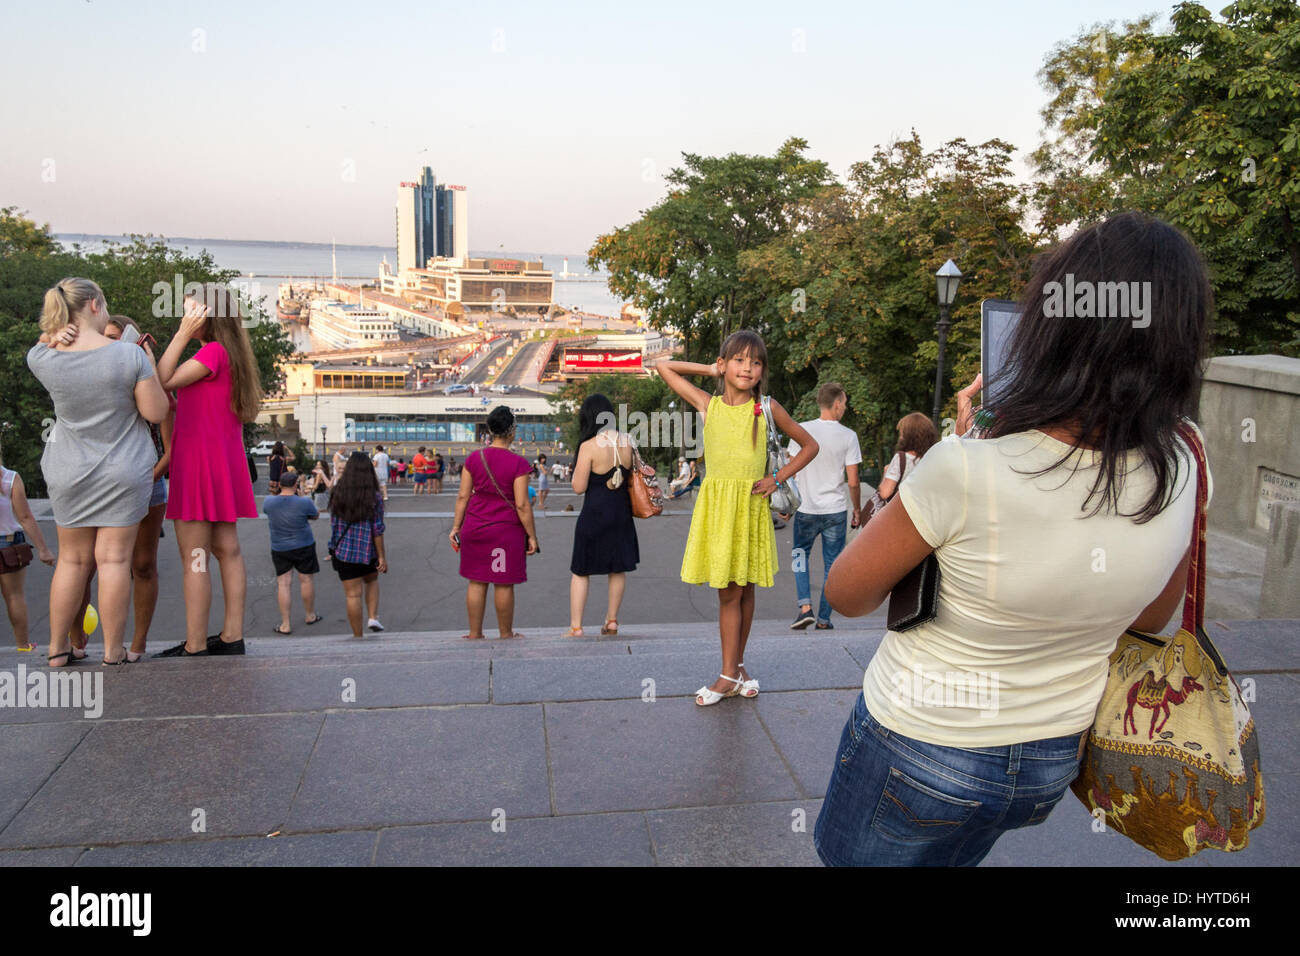 ODESSA, UKRAINE - AUGUST 14, 2015: Mother taking a picture of her daughter at the top of Potemkin stairs, one of the landmarks of Odessa, Ukraine  Pic Stock Photo